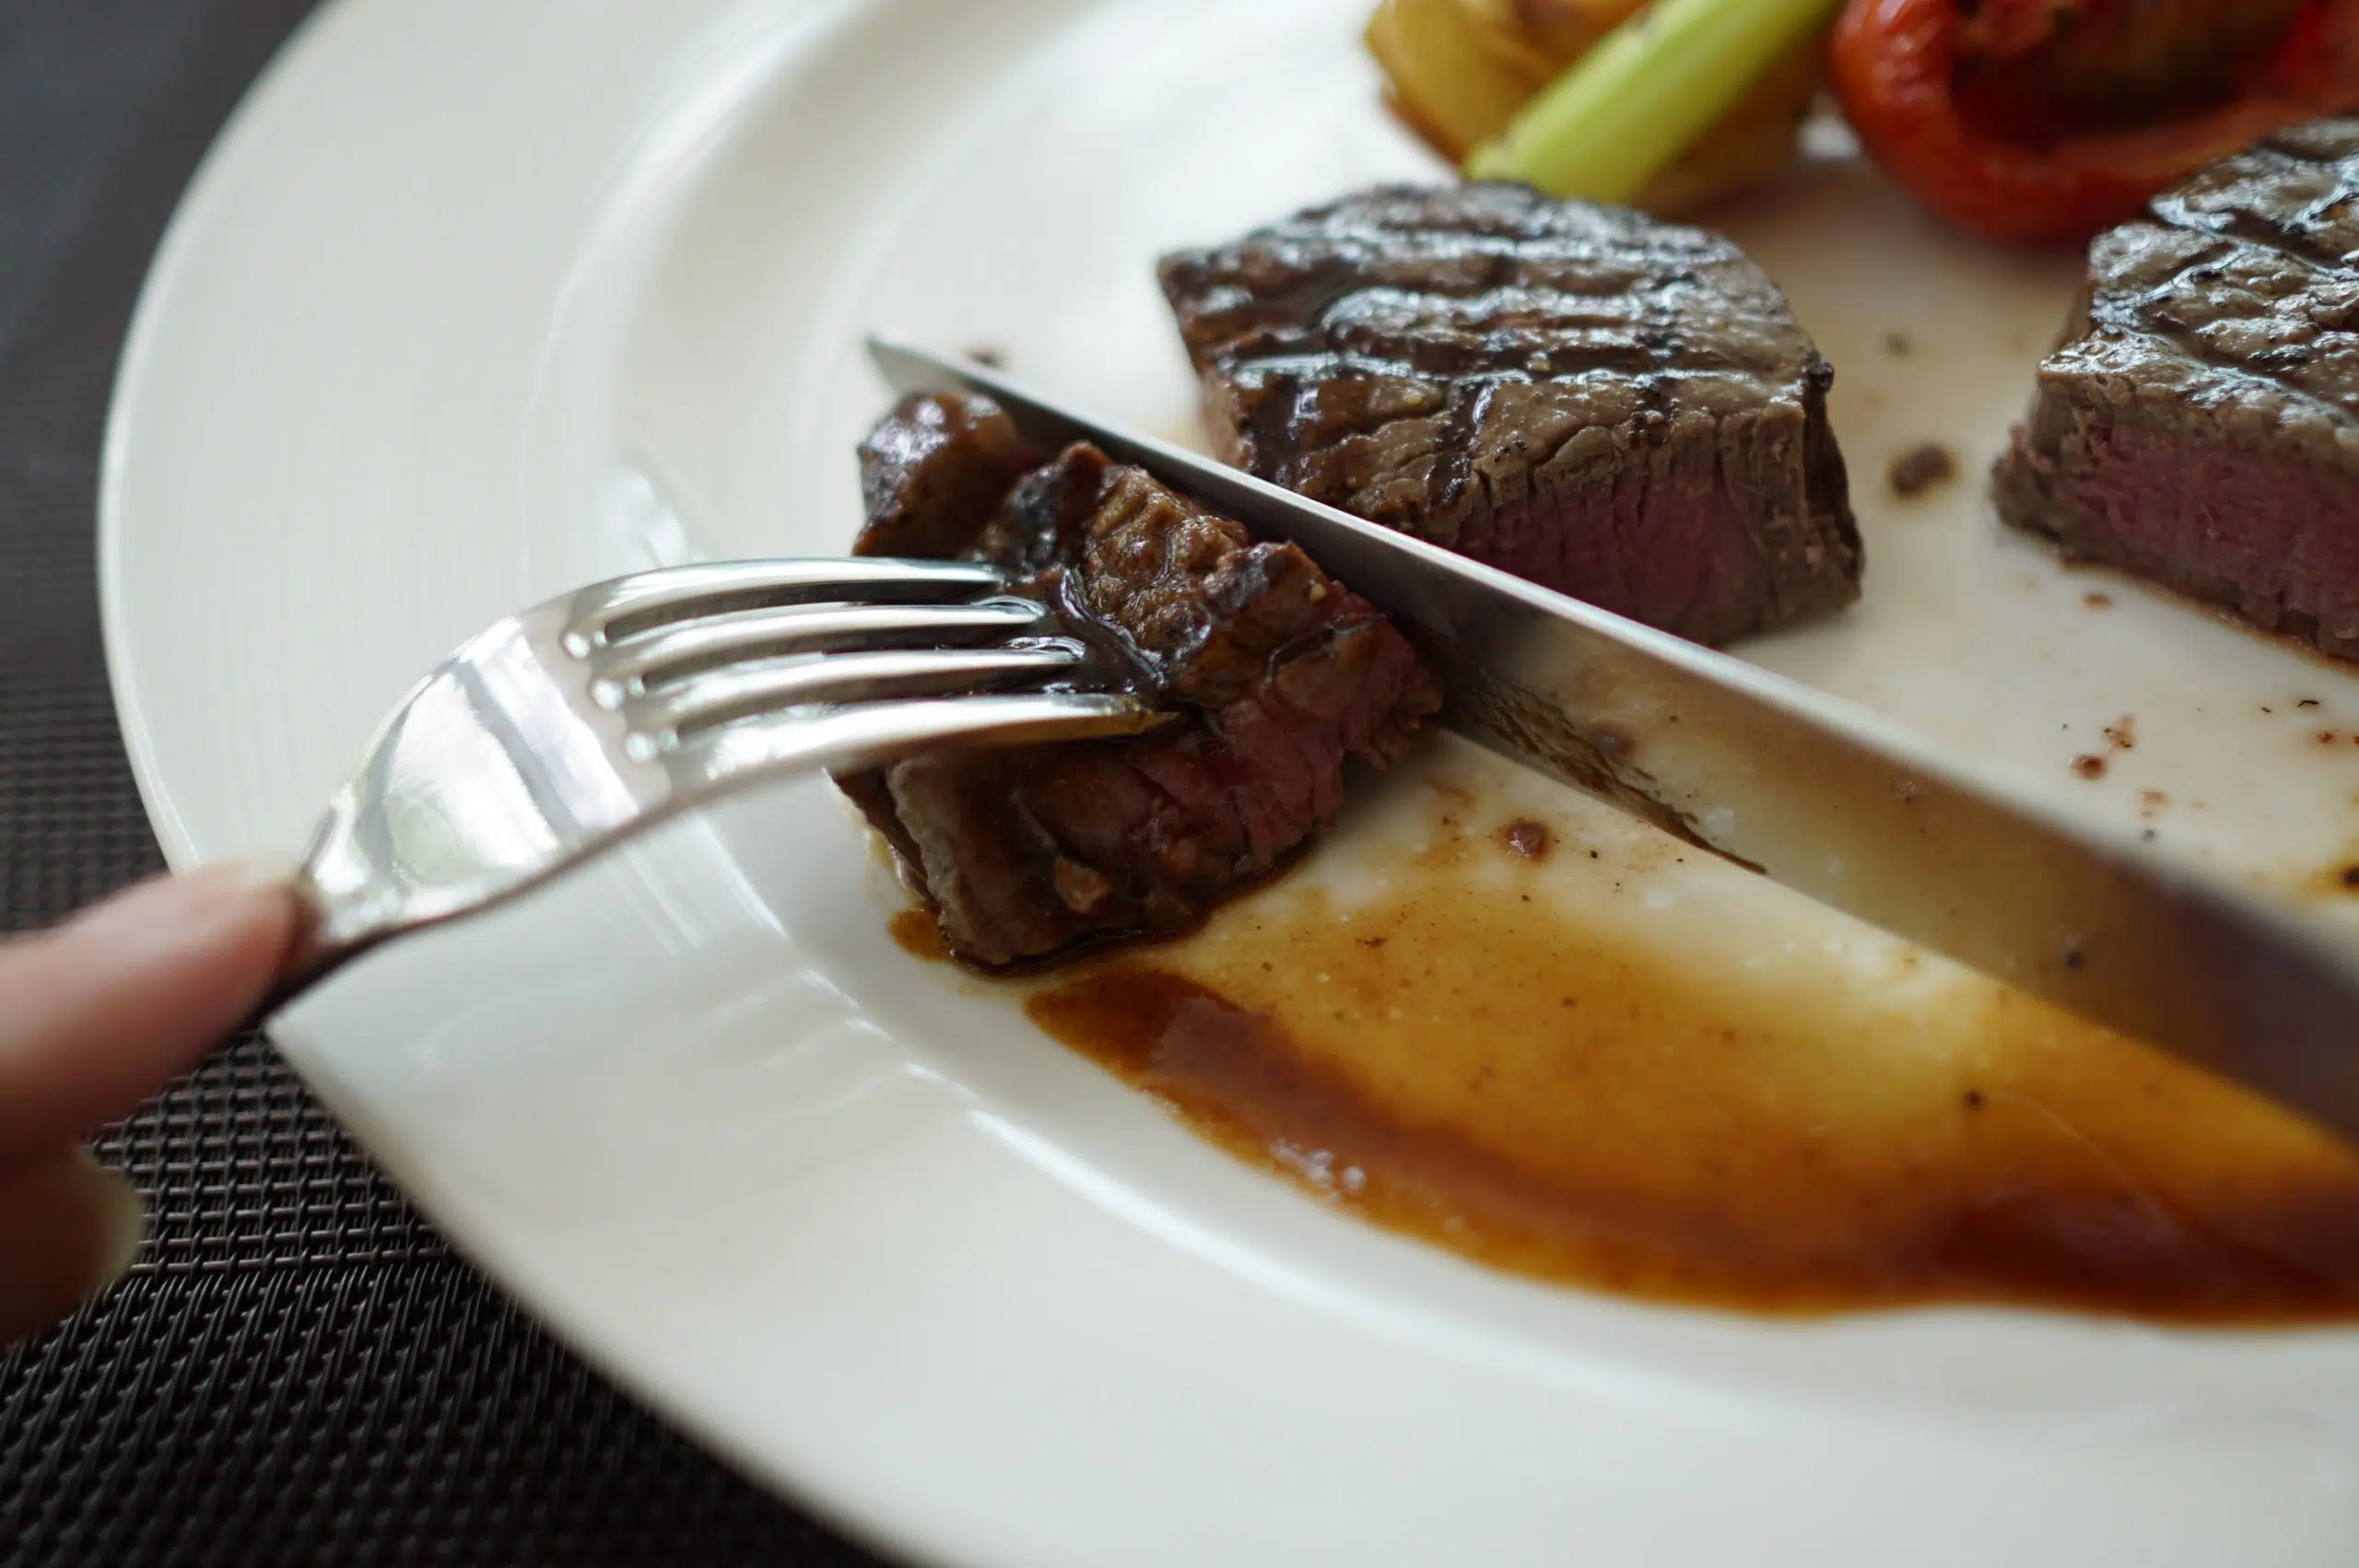 Steak prices in B.C about to go up